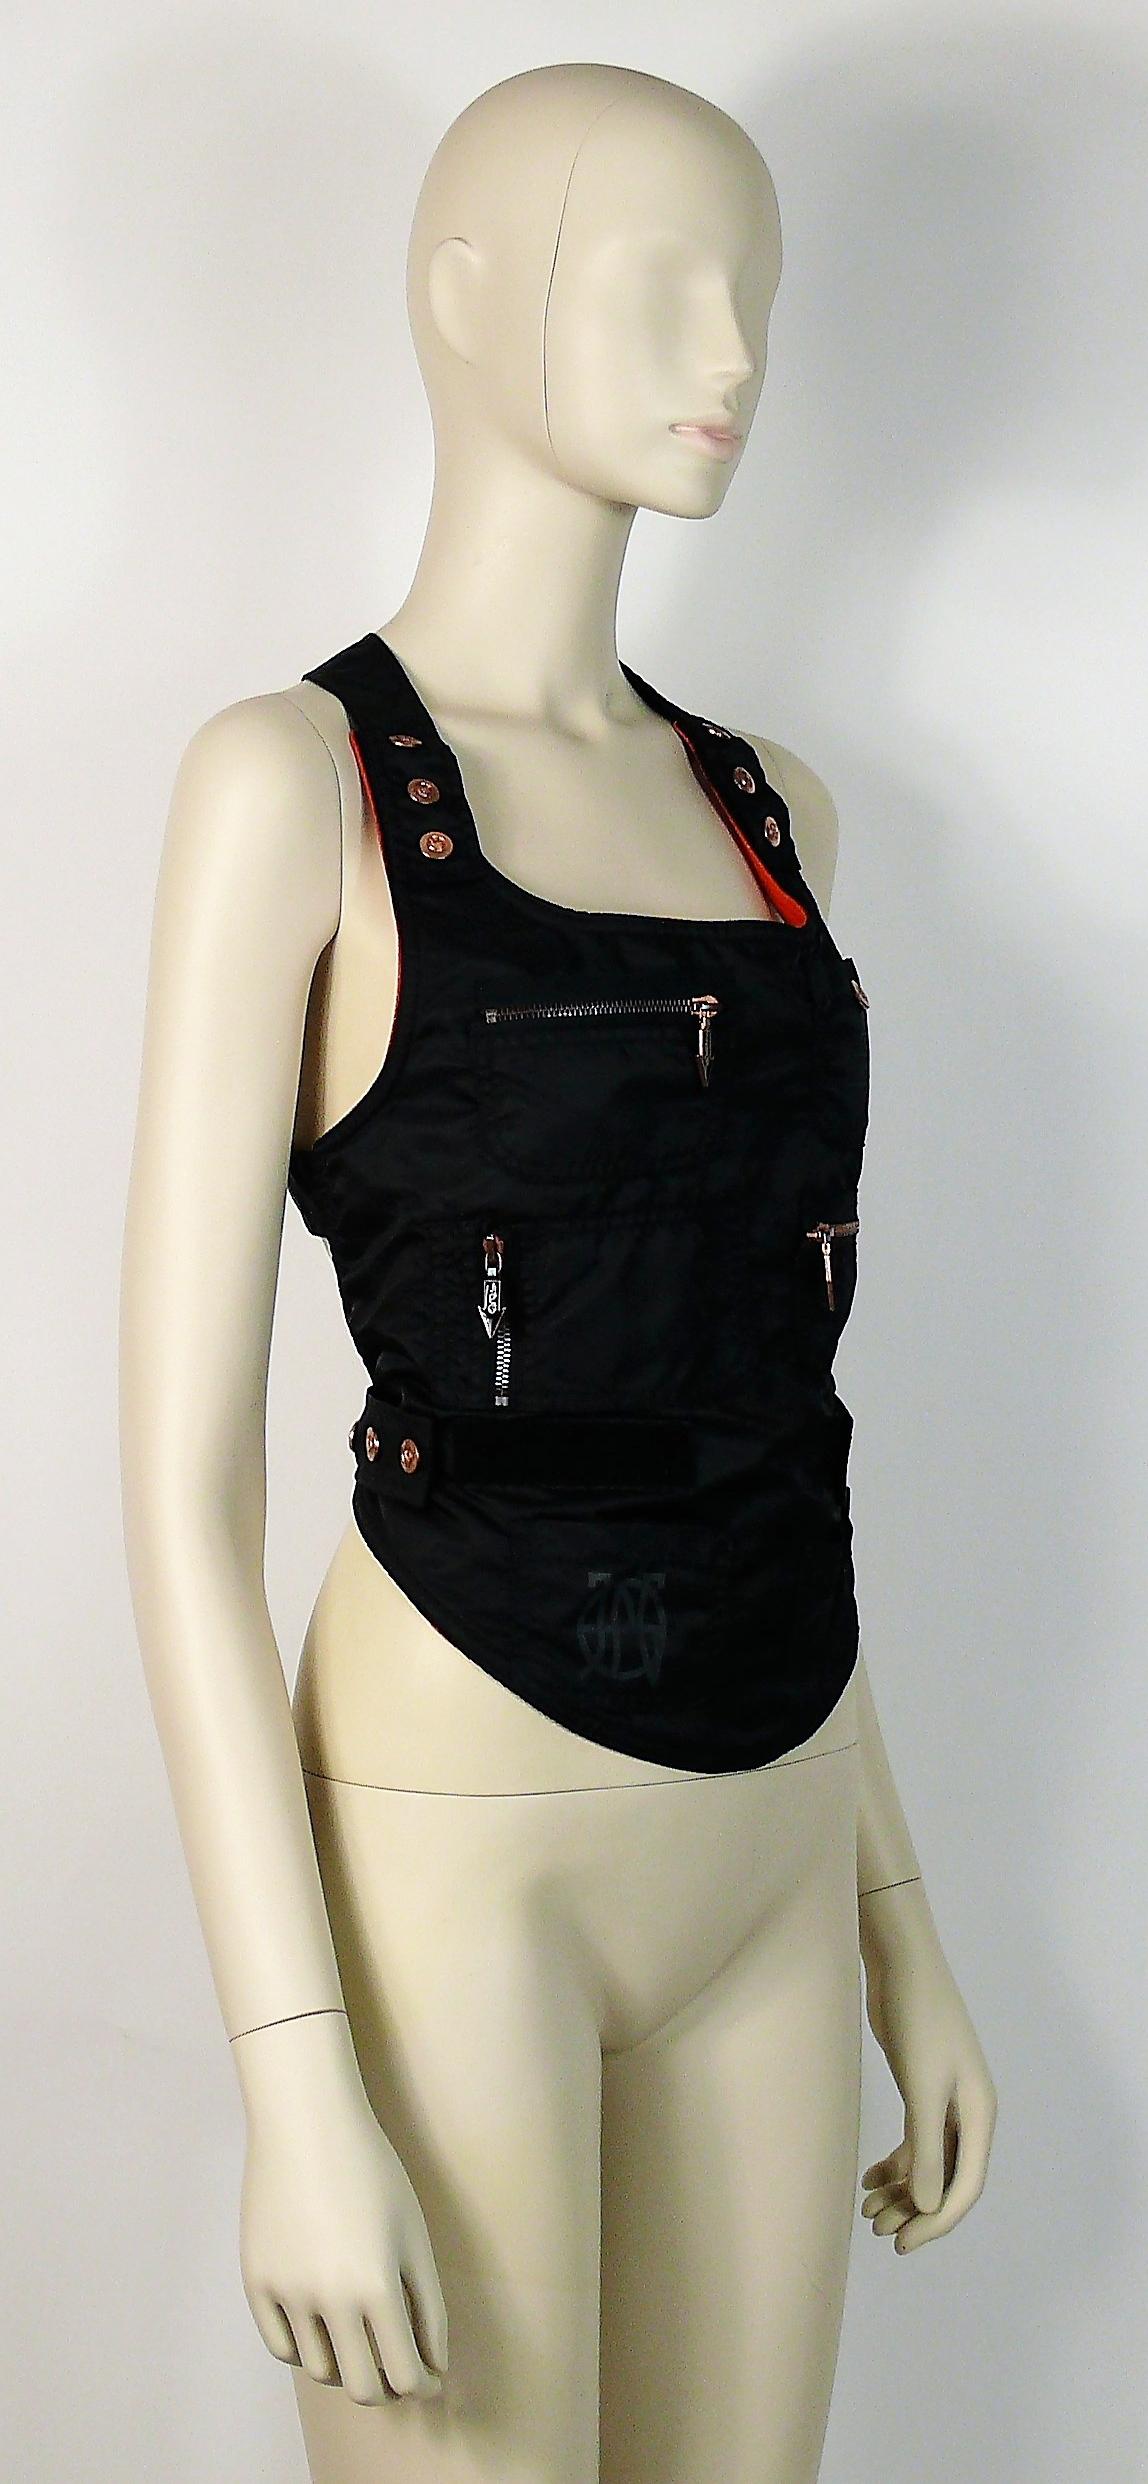 JEAN PAUL GAULTIER rare SAFE SEX nylon bondage backless utilitarian vest.

This vest features :
- Black nylon with cross bondage detailing at the back.
- JPG logo and JPG Safe Sex print.
- Straps have adjustable snap buttons and velcro fastening at